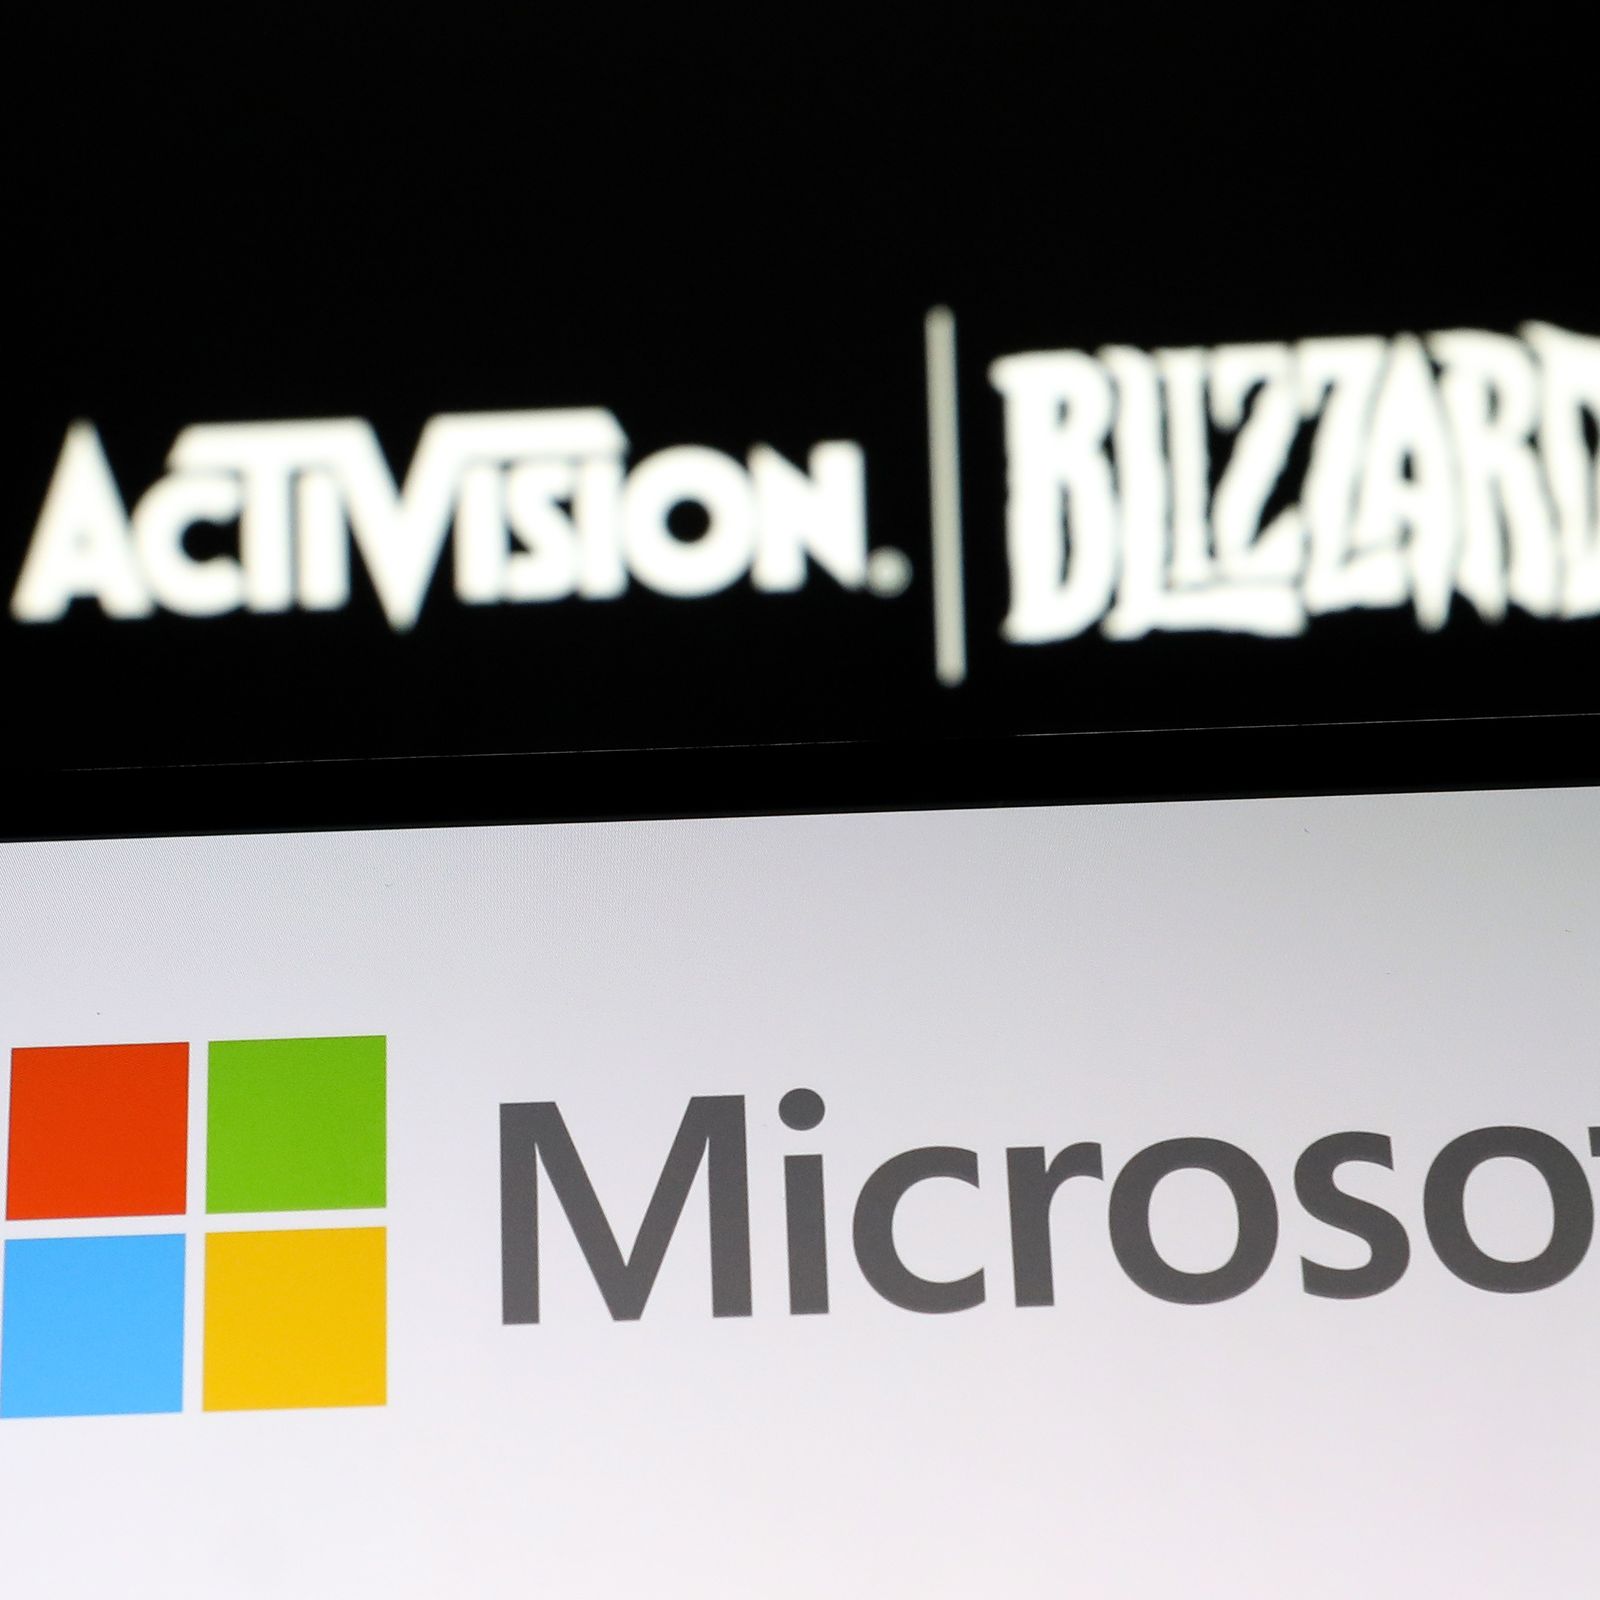 FTC Seeks to Reverse Microsoft's Activision Acquisition